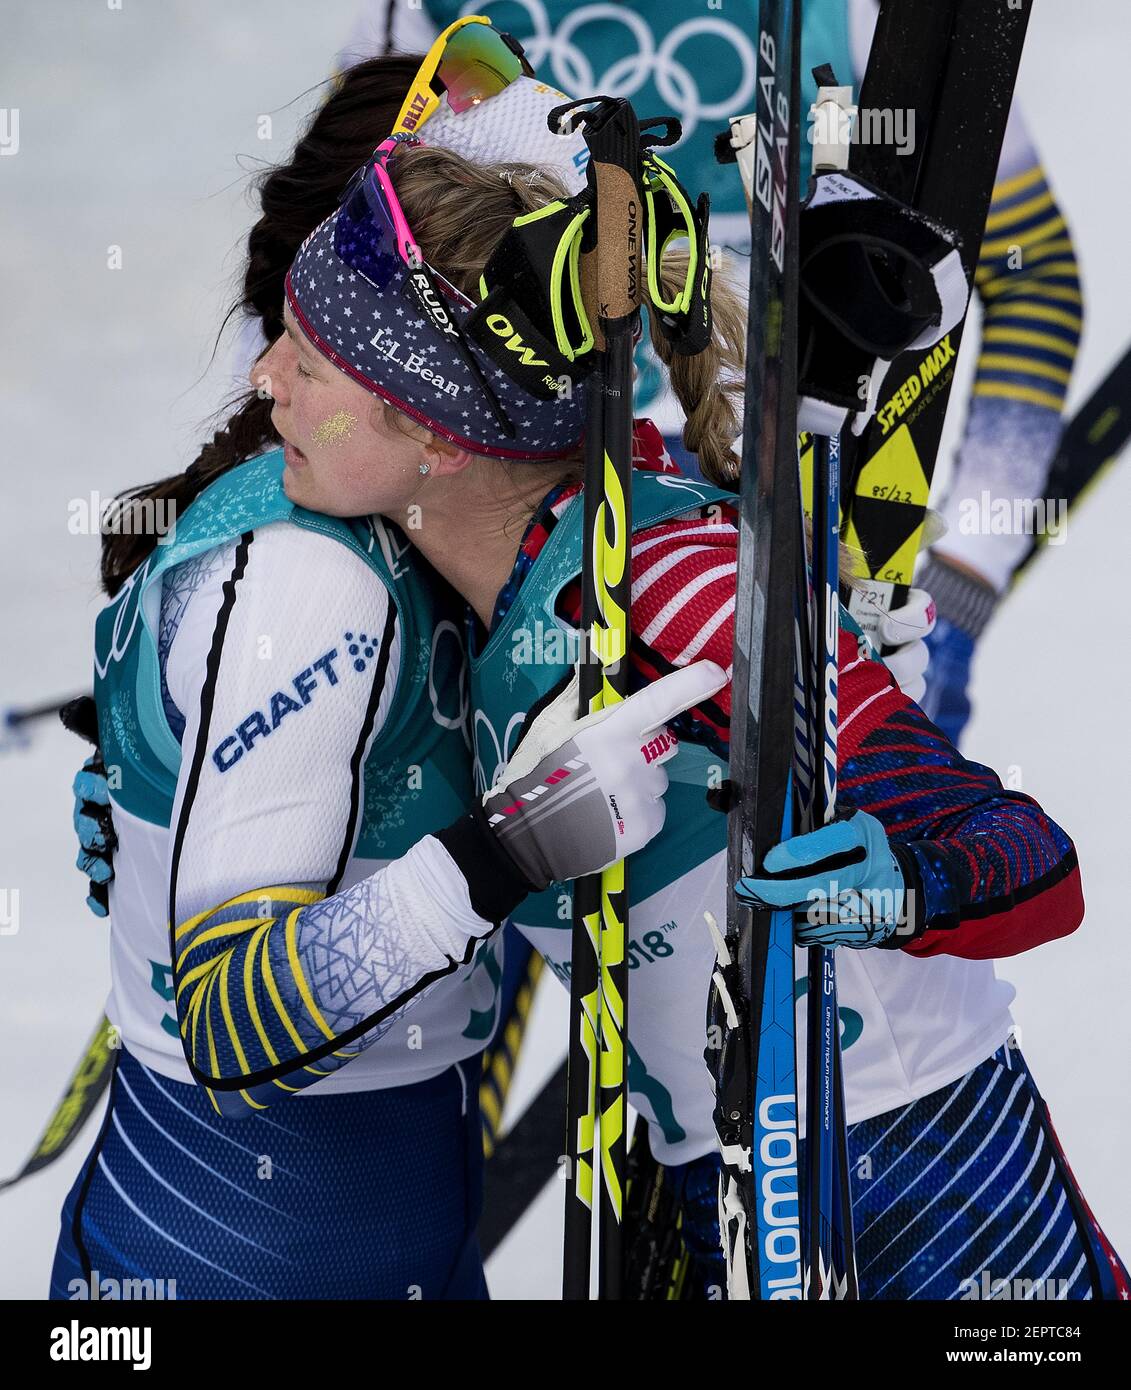 Jessie Diggins (3) from Afton, Minn., hugs winner Charlotte Kalla of Sweden at the end of the women's 7.5km + 7.5km Skiathlon at Alpensia Cross-Country Skiing Centre on Saturday, Feb. 10, 2018, at the Pyeongchang Winter Olympics. Diggins placed fifth in the event. (Photo by Carlos Gonzalez/Minneapolis Star Tribune/TNS/Sipa USA) Stock Photo